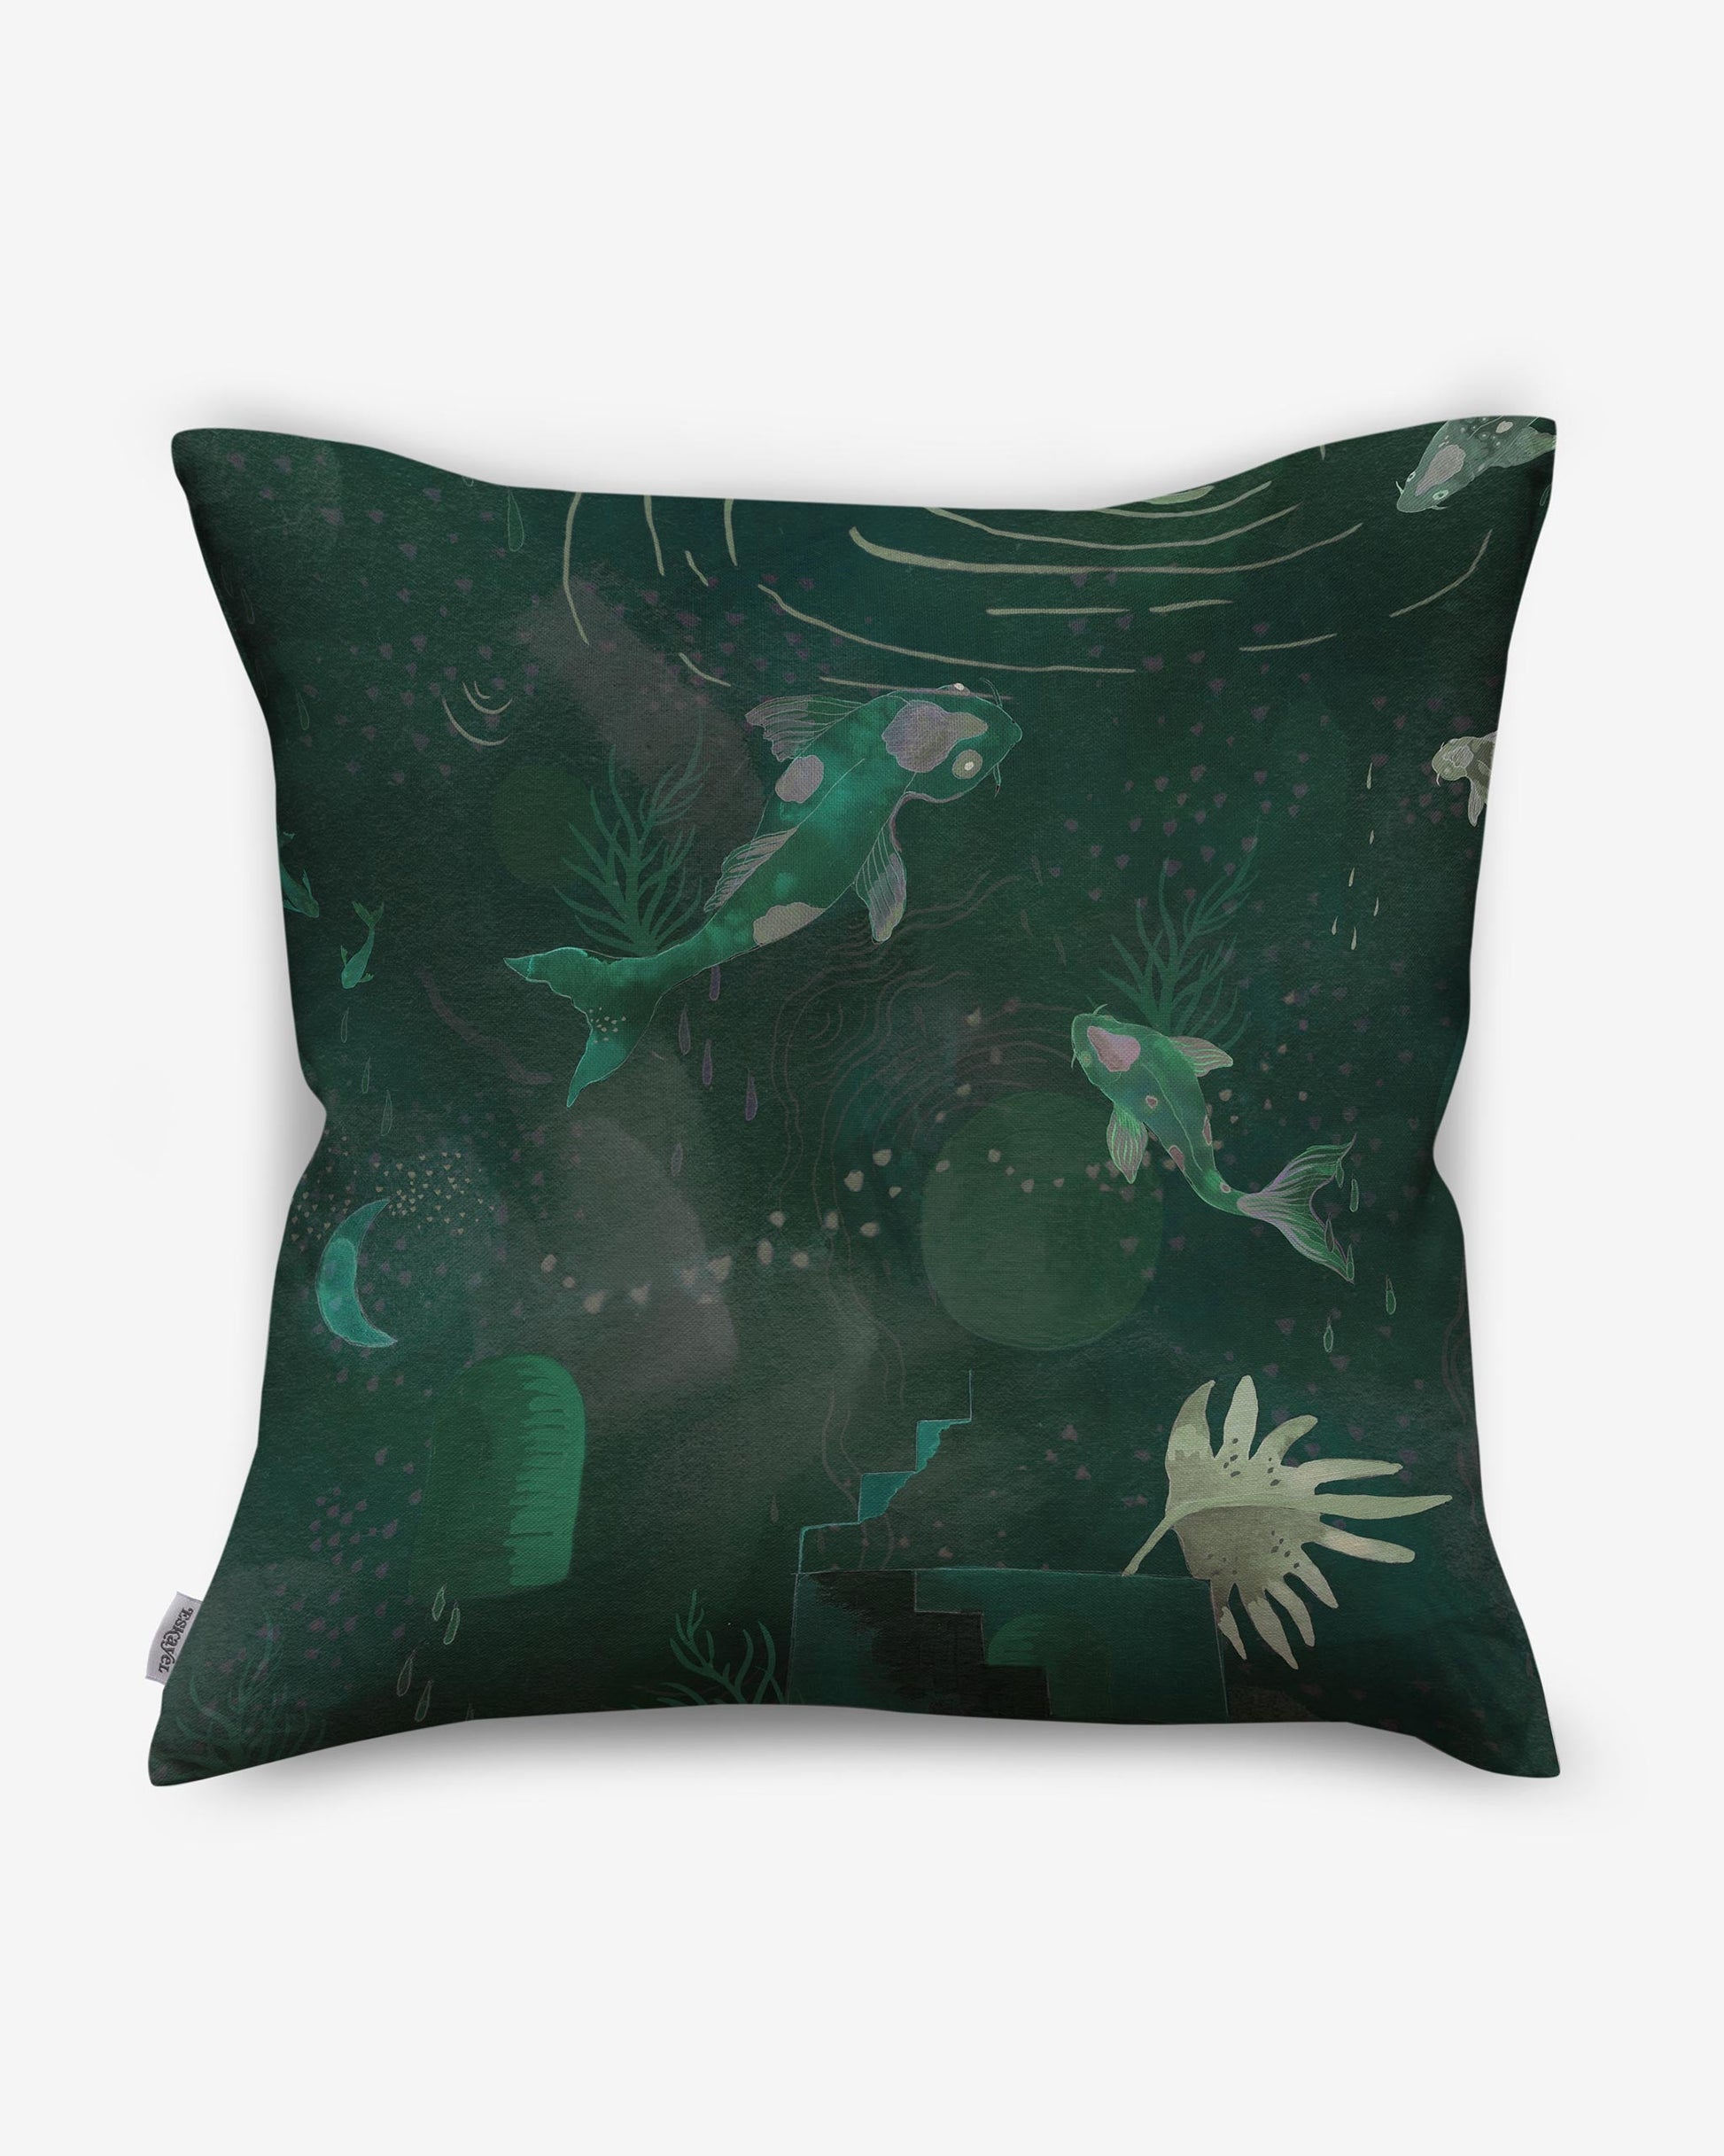 An Water Signs Pillow Emerald with fish and plants on it, made of fabric